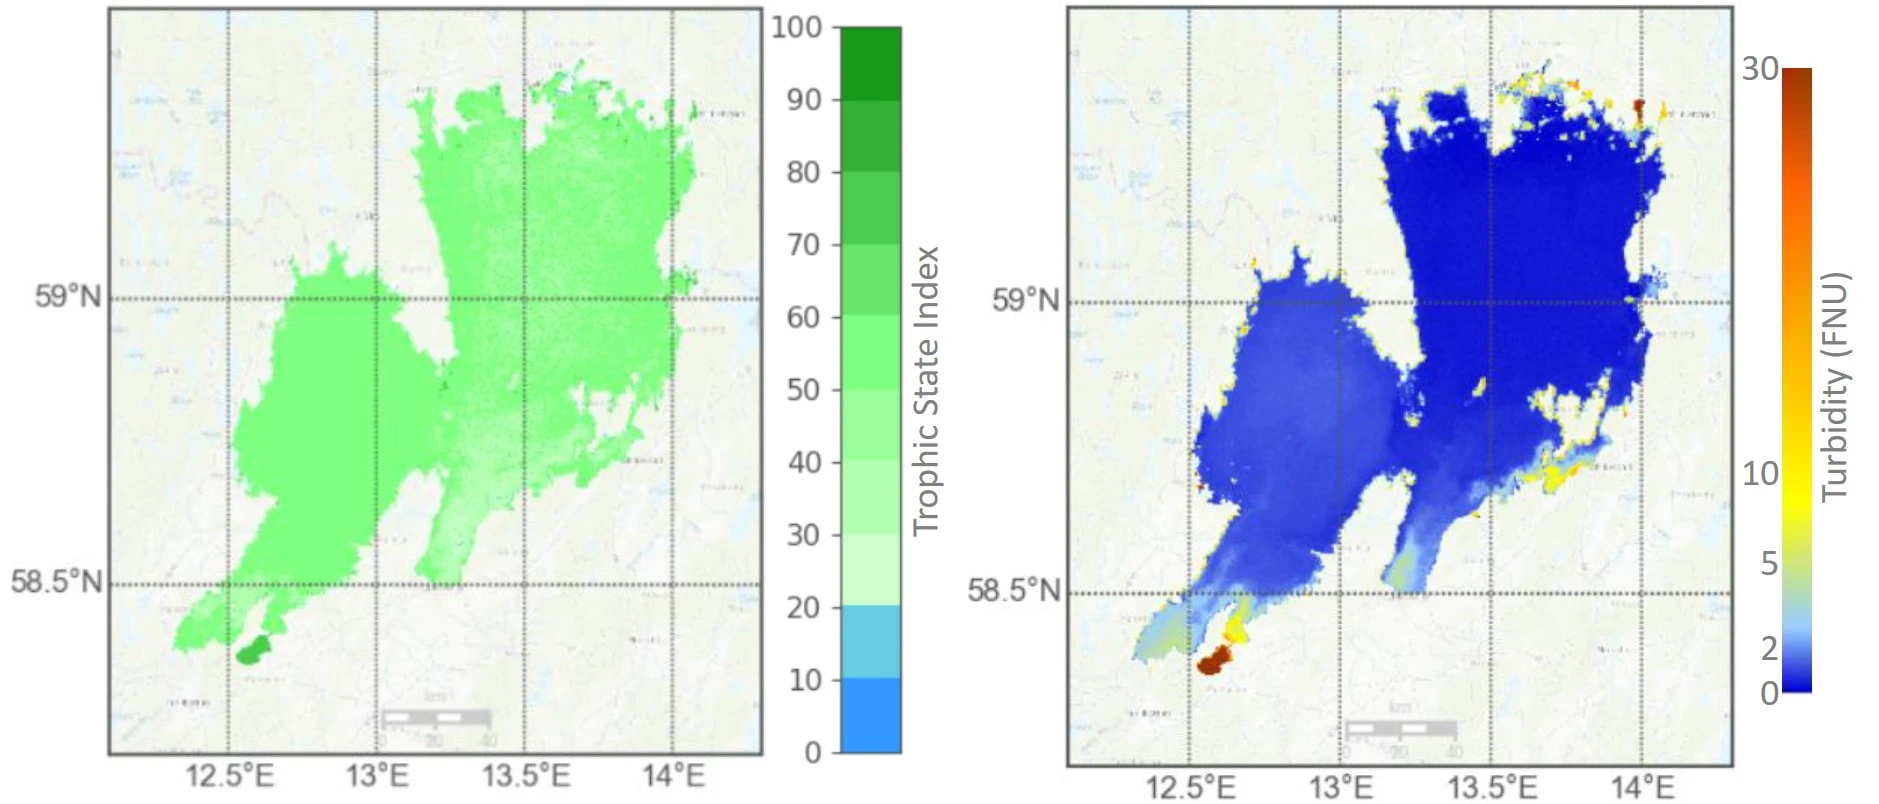 Water quality of Lake Vänern, Sweden, on 11 April 2018 expressed as trophic state index (left) and turbidity (right) provided by the Copernicus Global Land Service